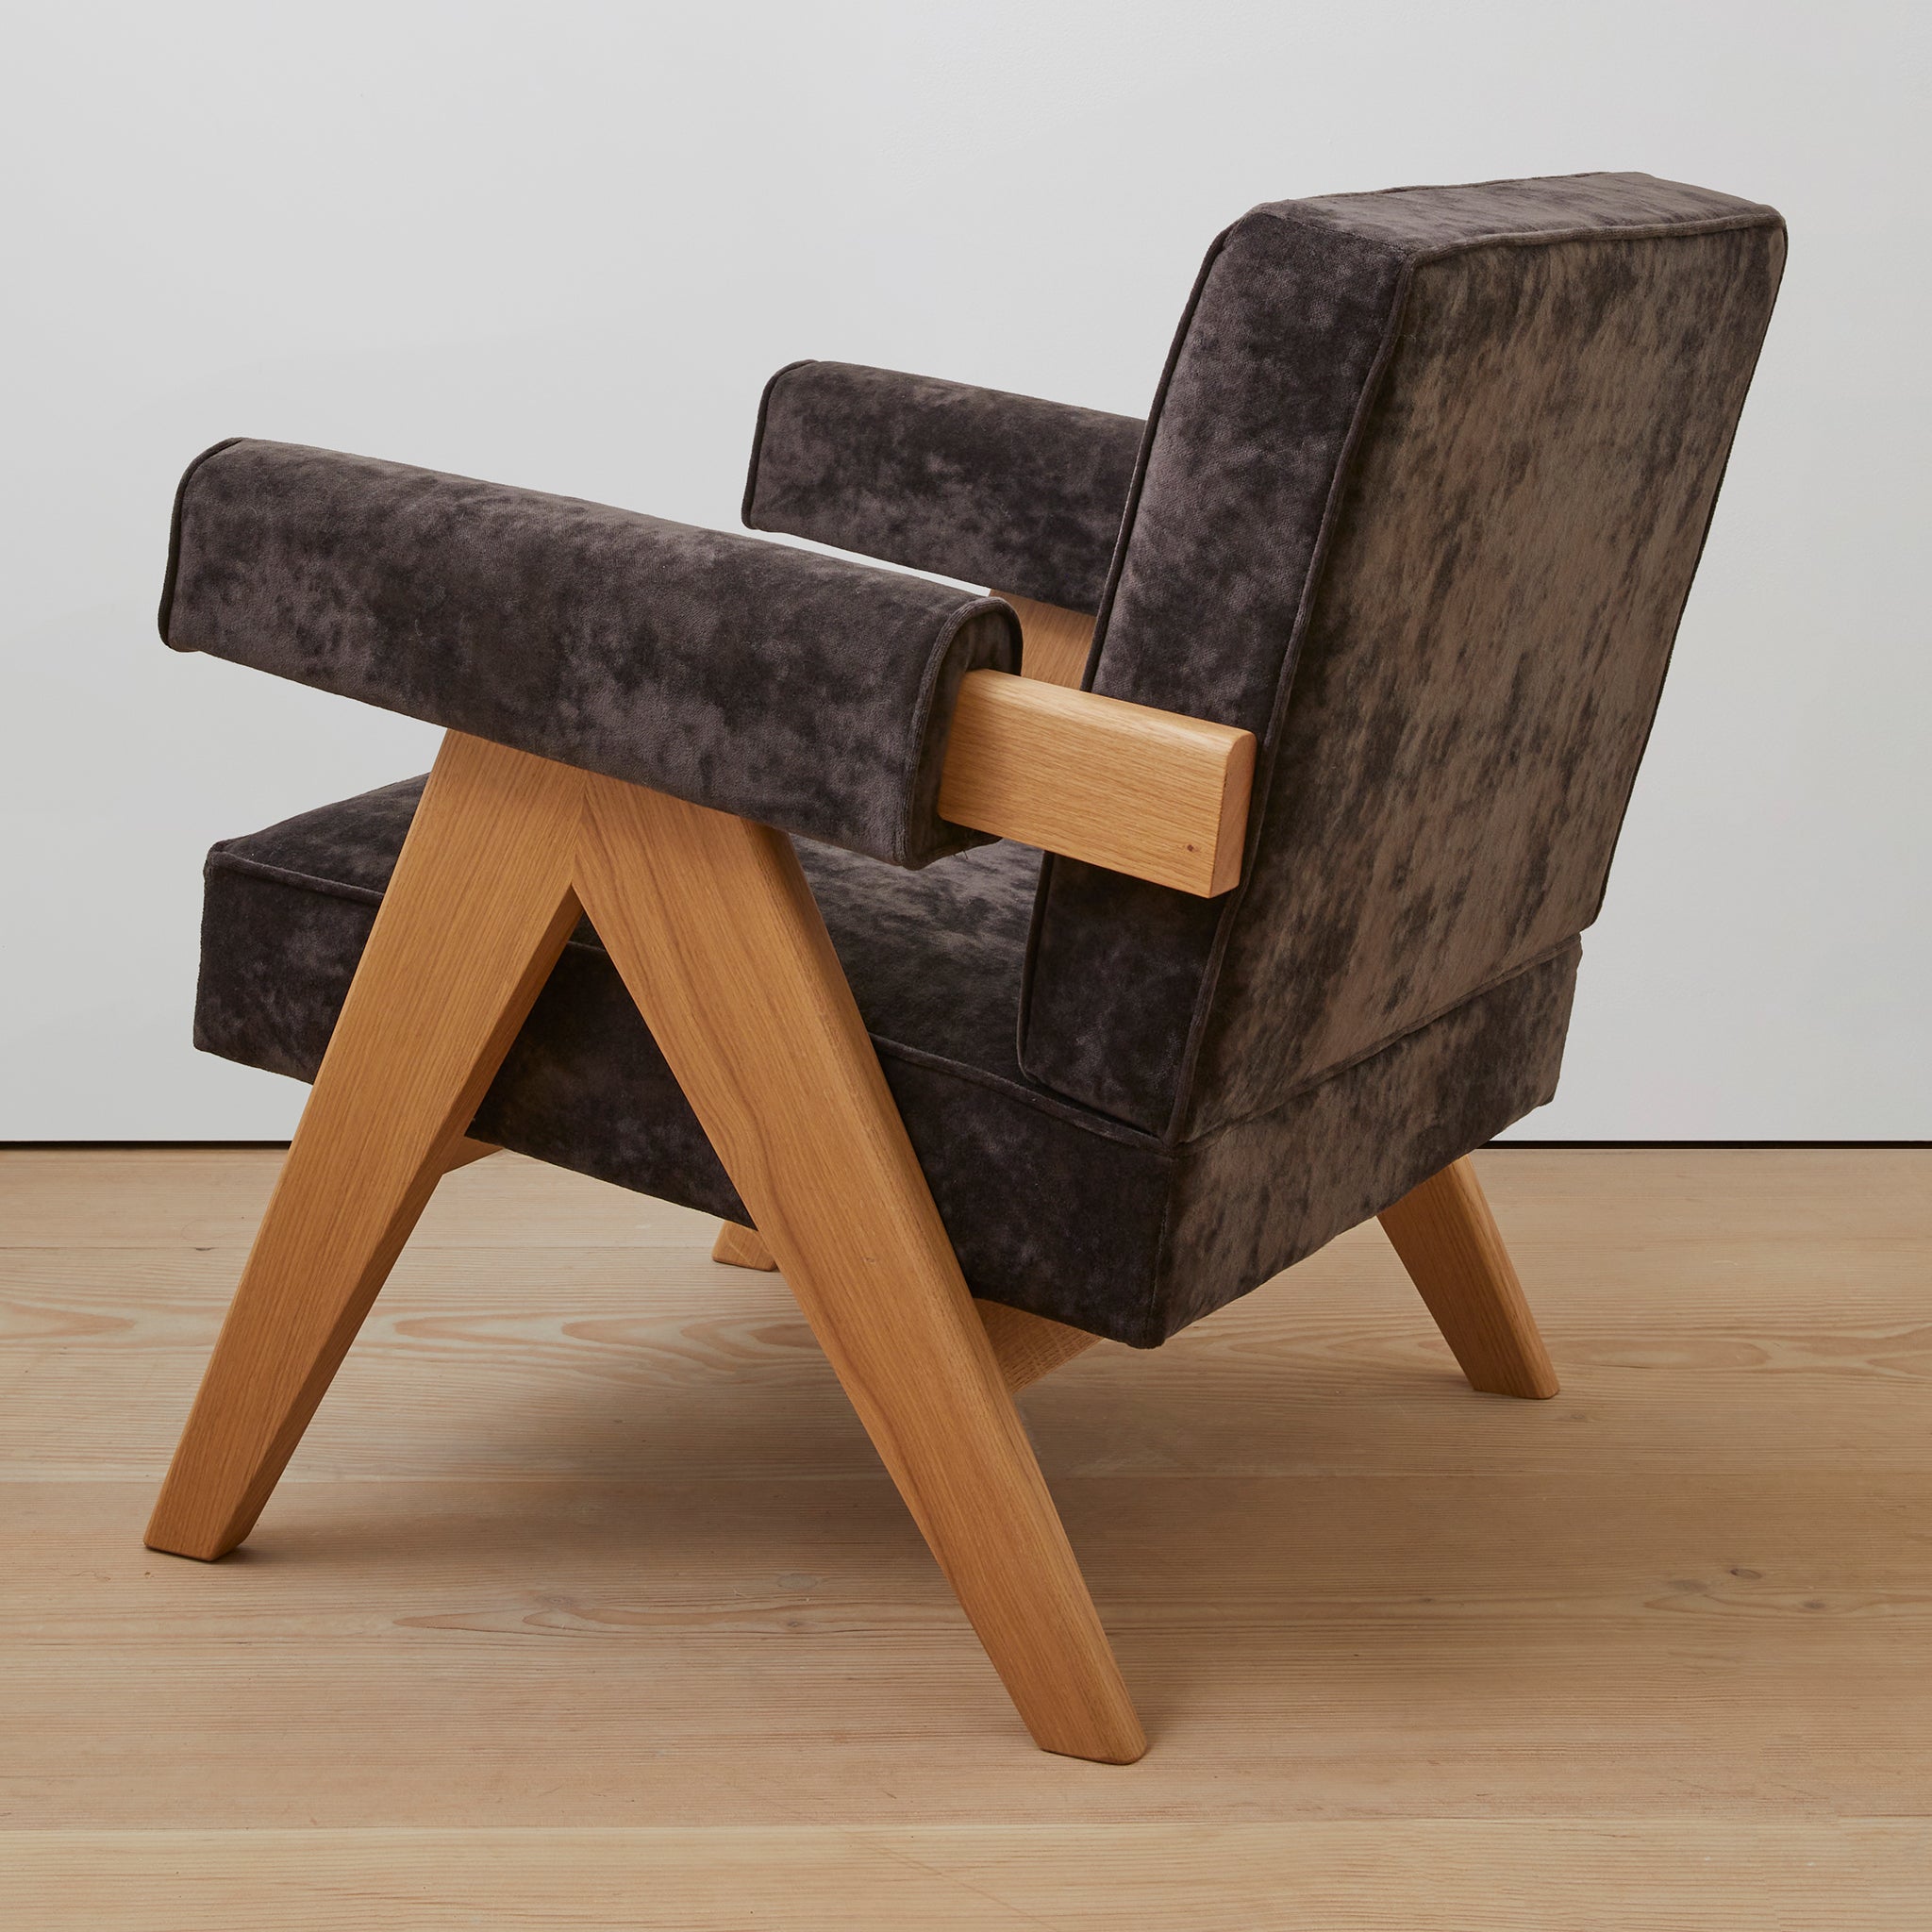 Back view of an authentic chandigarh lounge chair, pierre jeanneret era, natural oak frame, chocolate brown mohair upholstery, by Klarel #K35-36